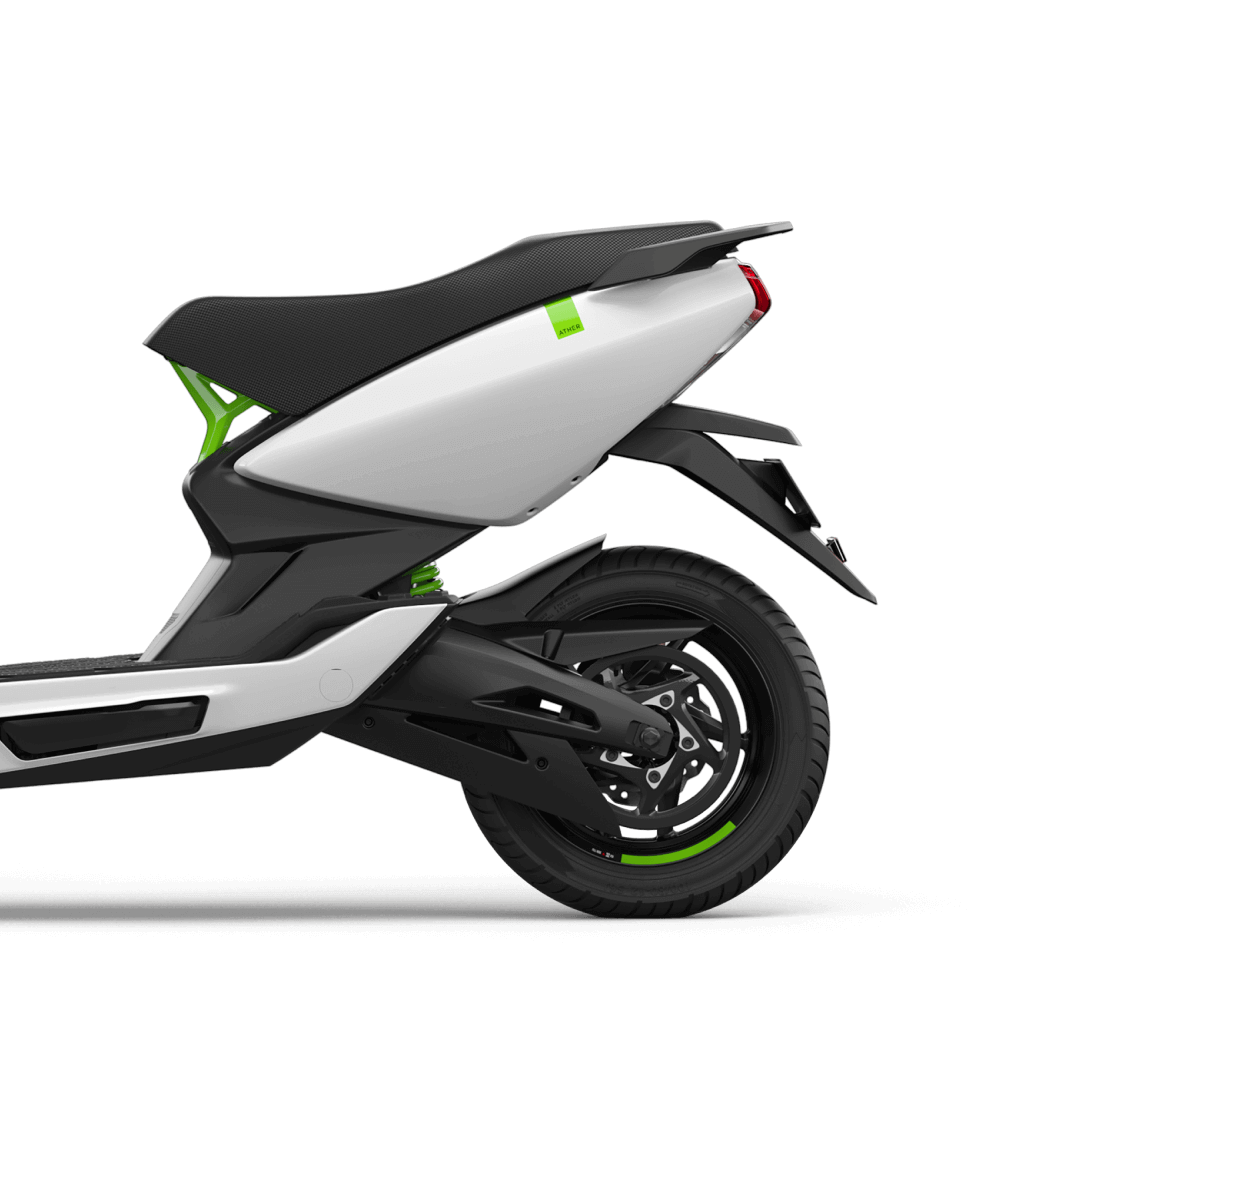 ather electric scooter still white colour